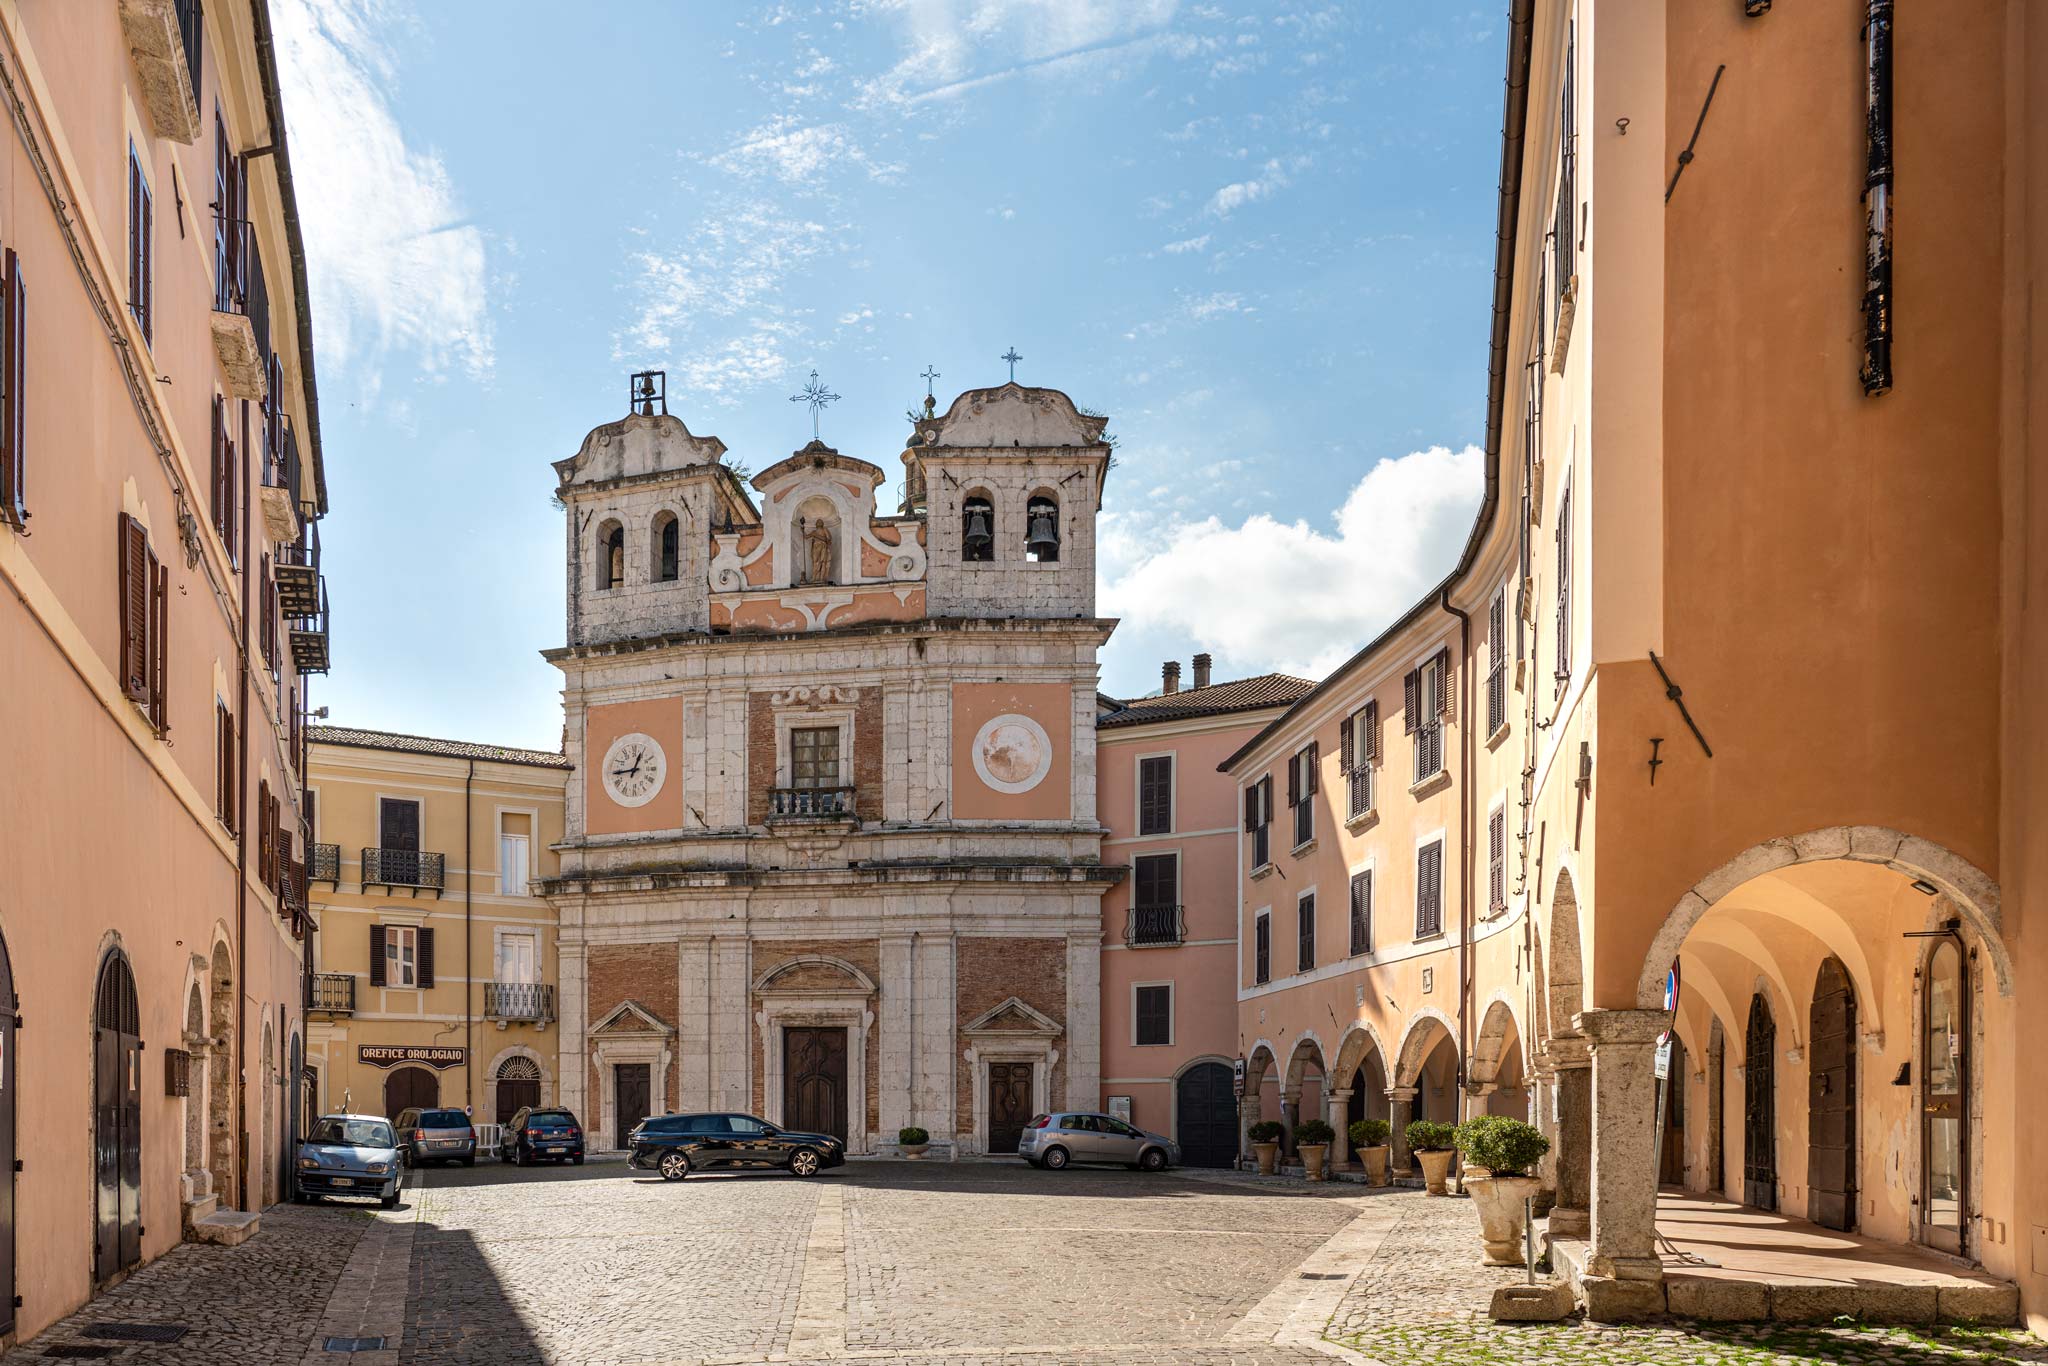 Atina's main church, one of the cutest villages near Rome